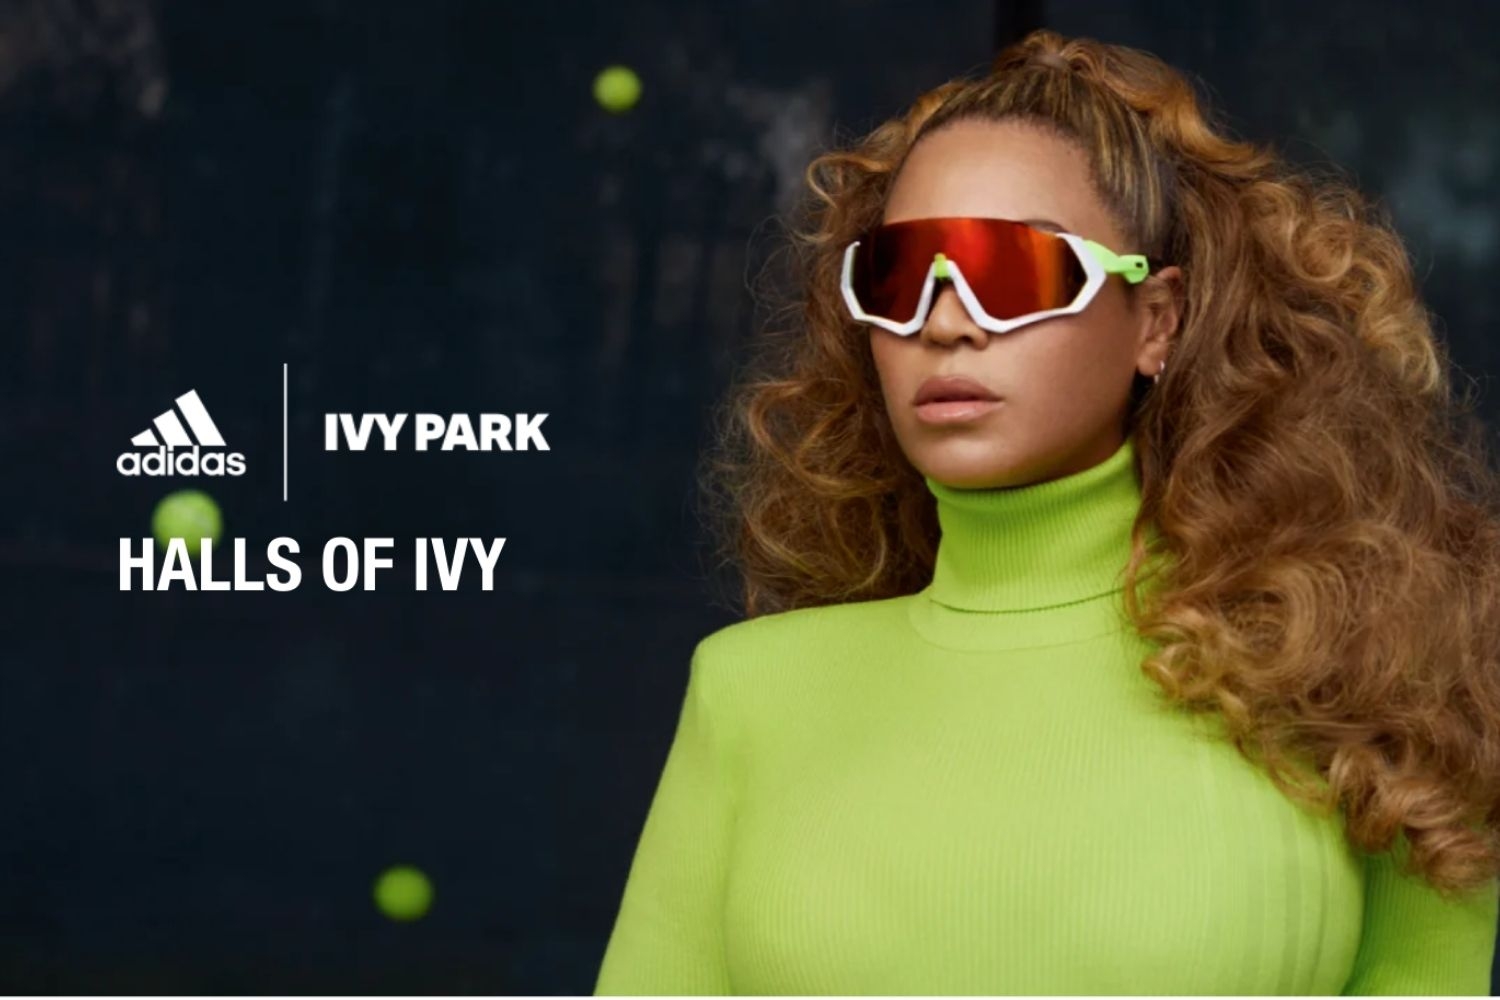 Shop the 'Halls of IVY PARK' collection now at adidas